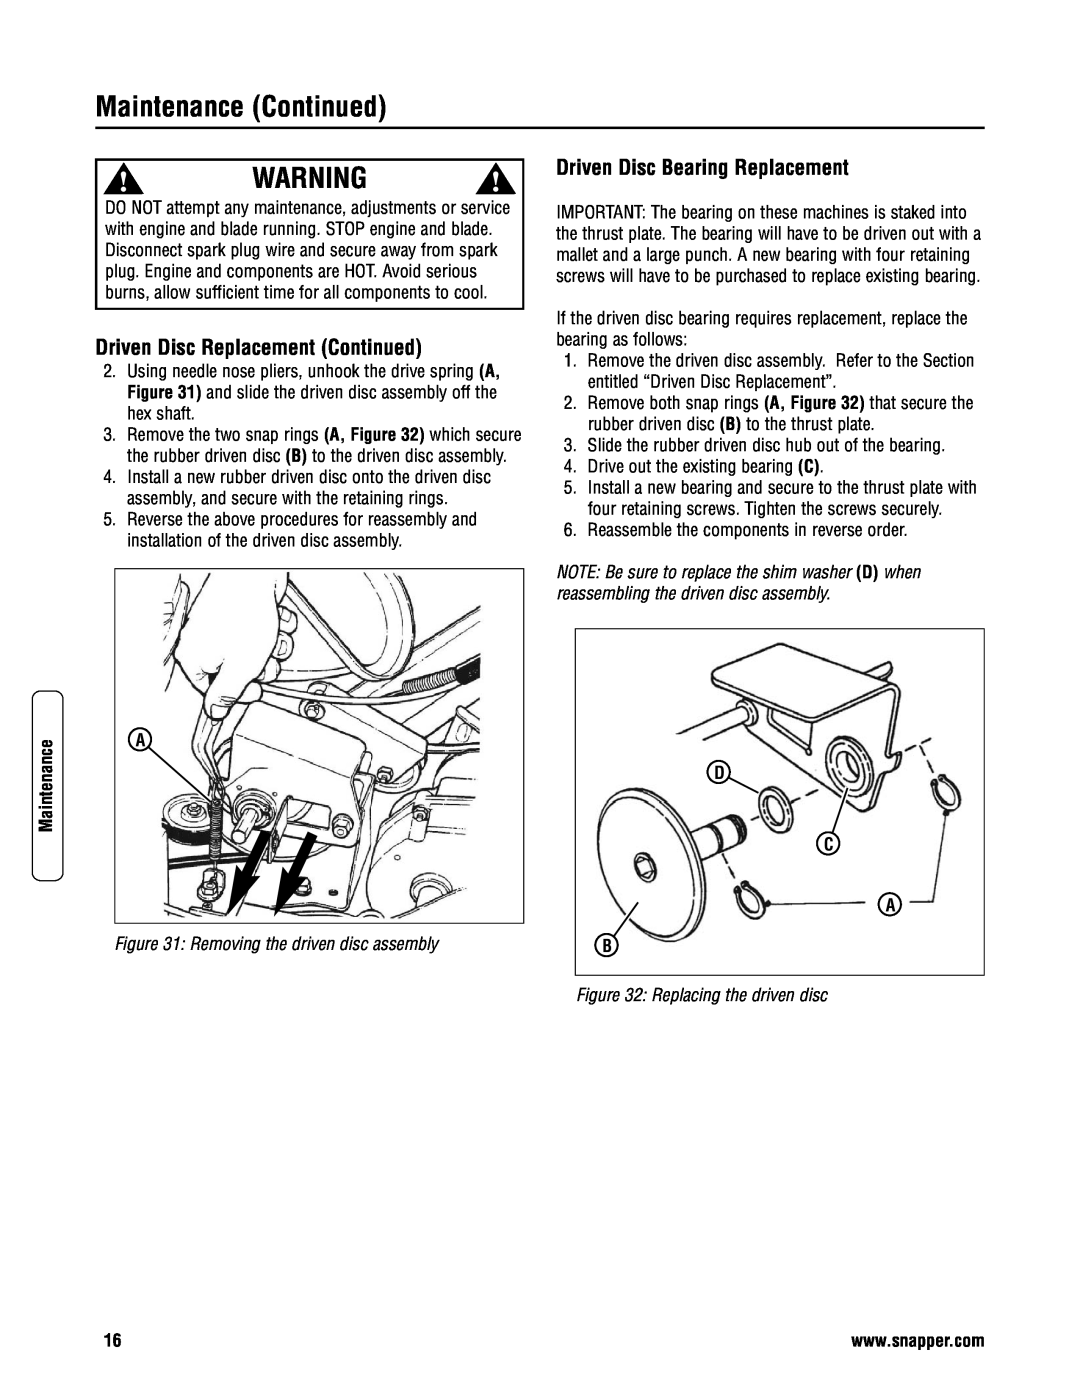 Snapper NP2167519B Driven Disc Replacement Continued, Driven Disc Bearing Replacement, Removing the driven disc assembly 